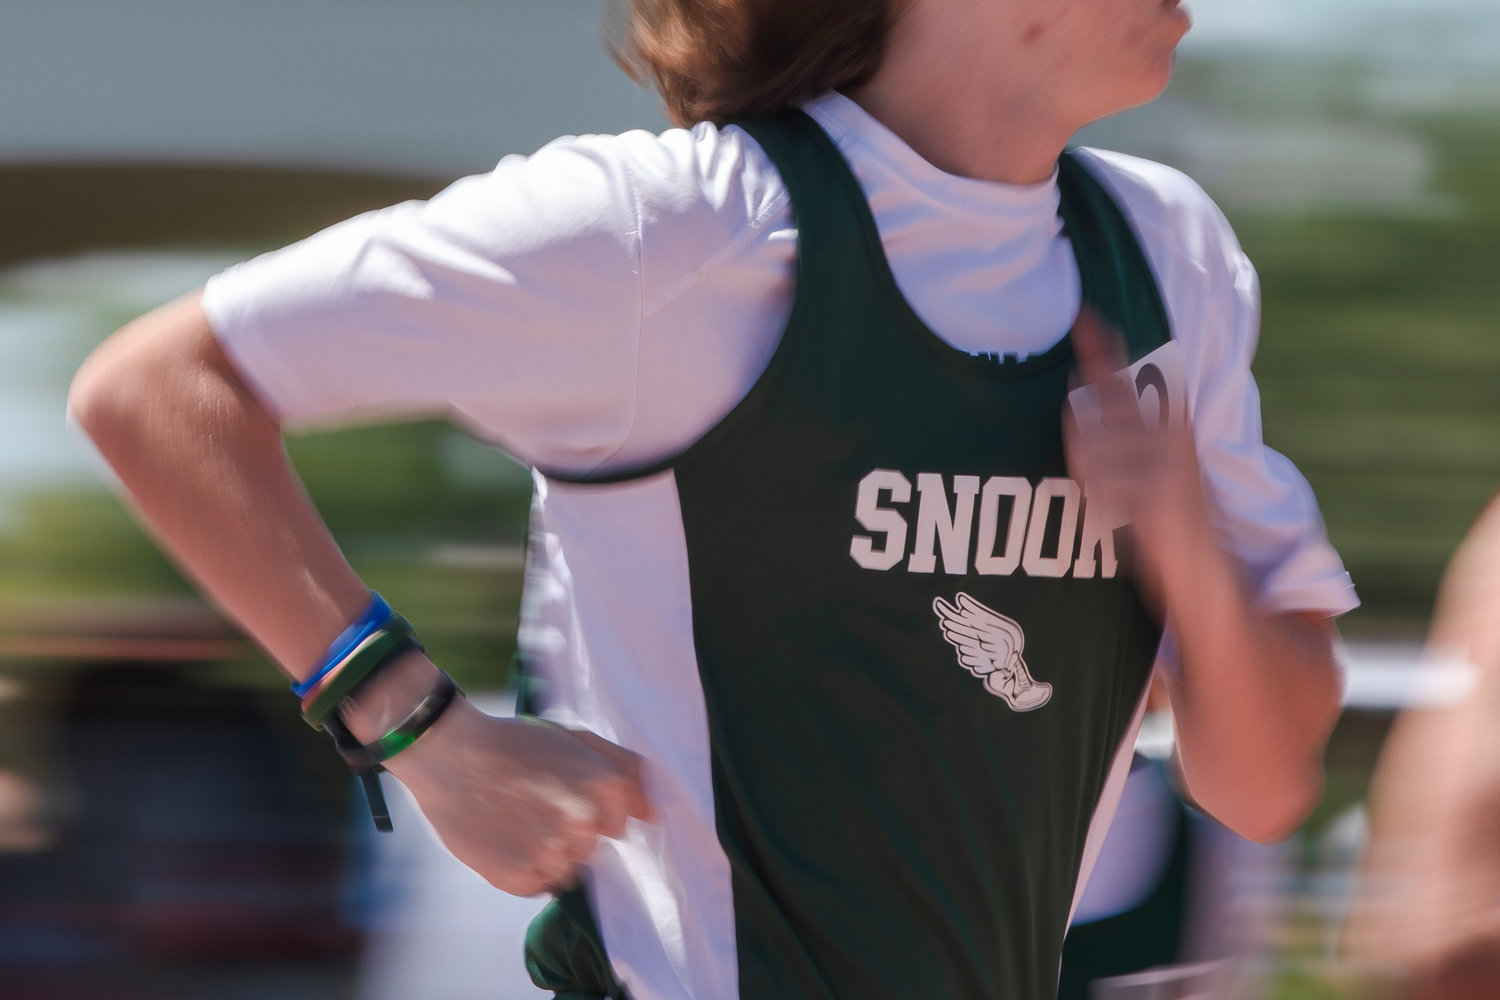 Brock Butts fights through the 800-meter run at the Alabama Independent School Association’s track and field state championships Friday, April 14, in Gulf Shores. Altogether, 12 Eagles represented their school and helped record 16 top-20 finishes against the best in the state.